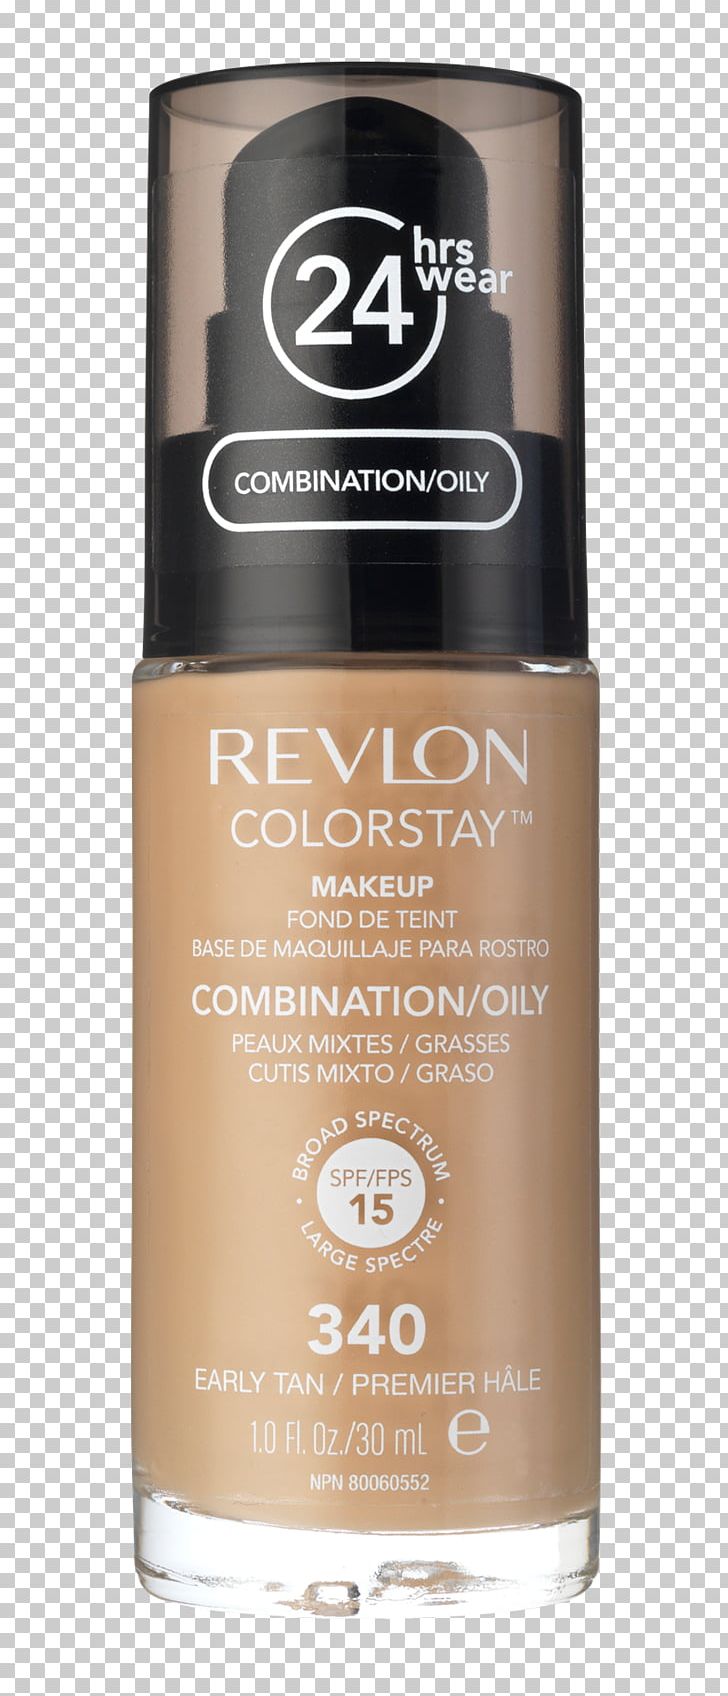 Cosmetics Skin Care Revlon Product PNG, Clipart, Cosmetics, Liquid, Others, Ounce, Revlon Free PNG Download